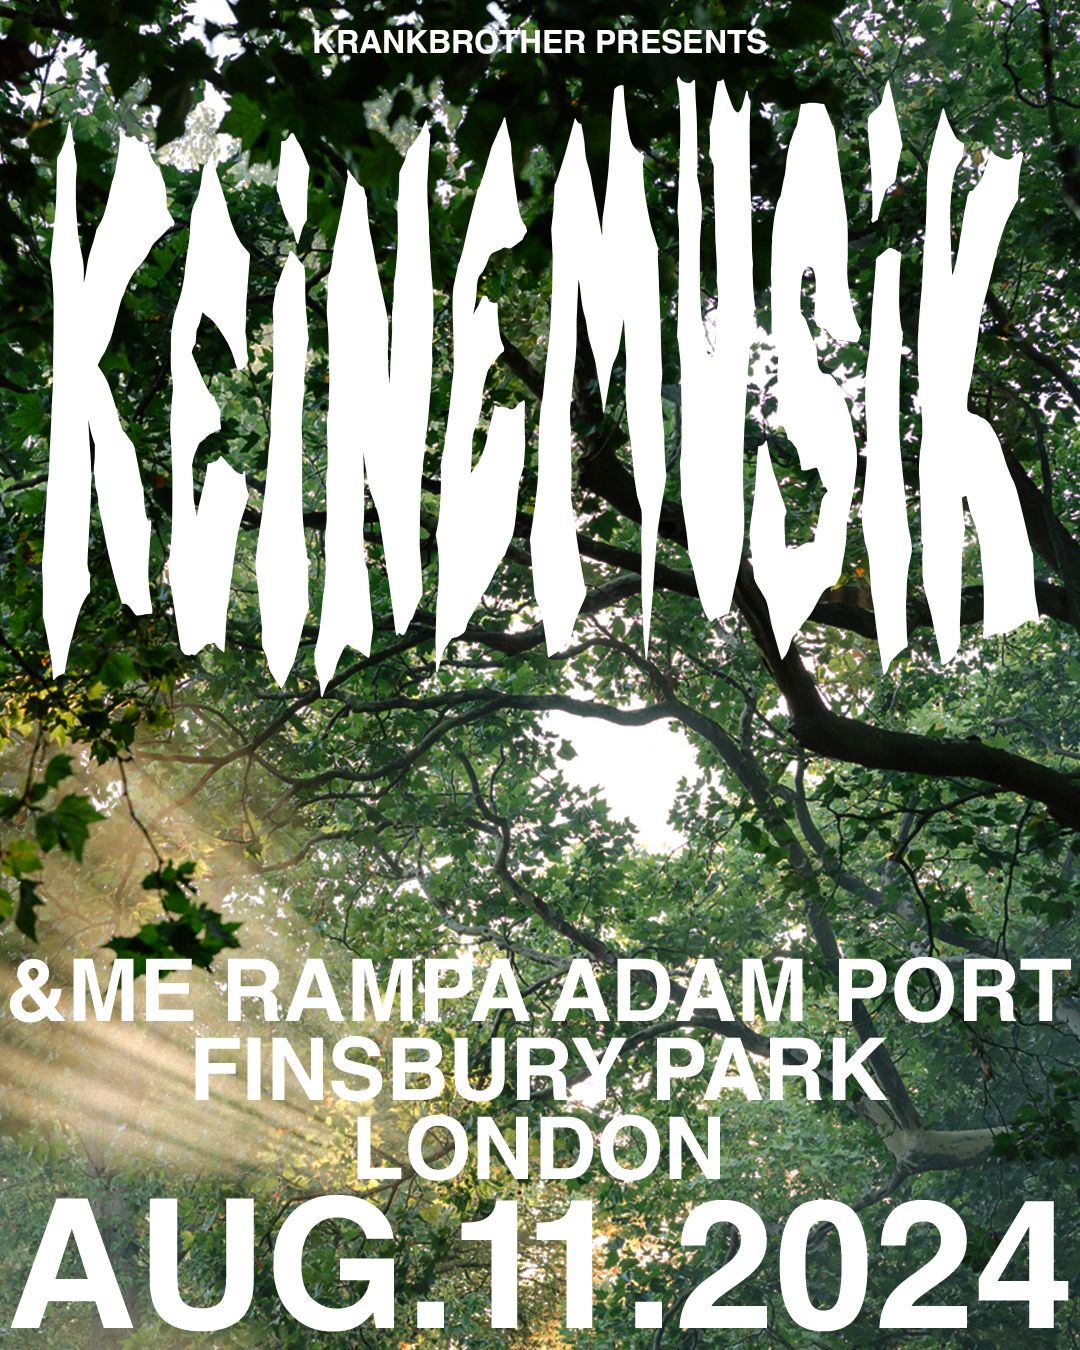 [SOLD OUT] Krankbrother presents: Keinemusik